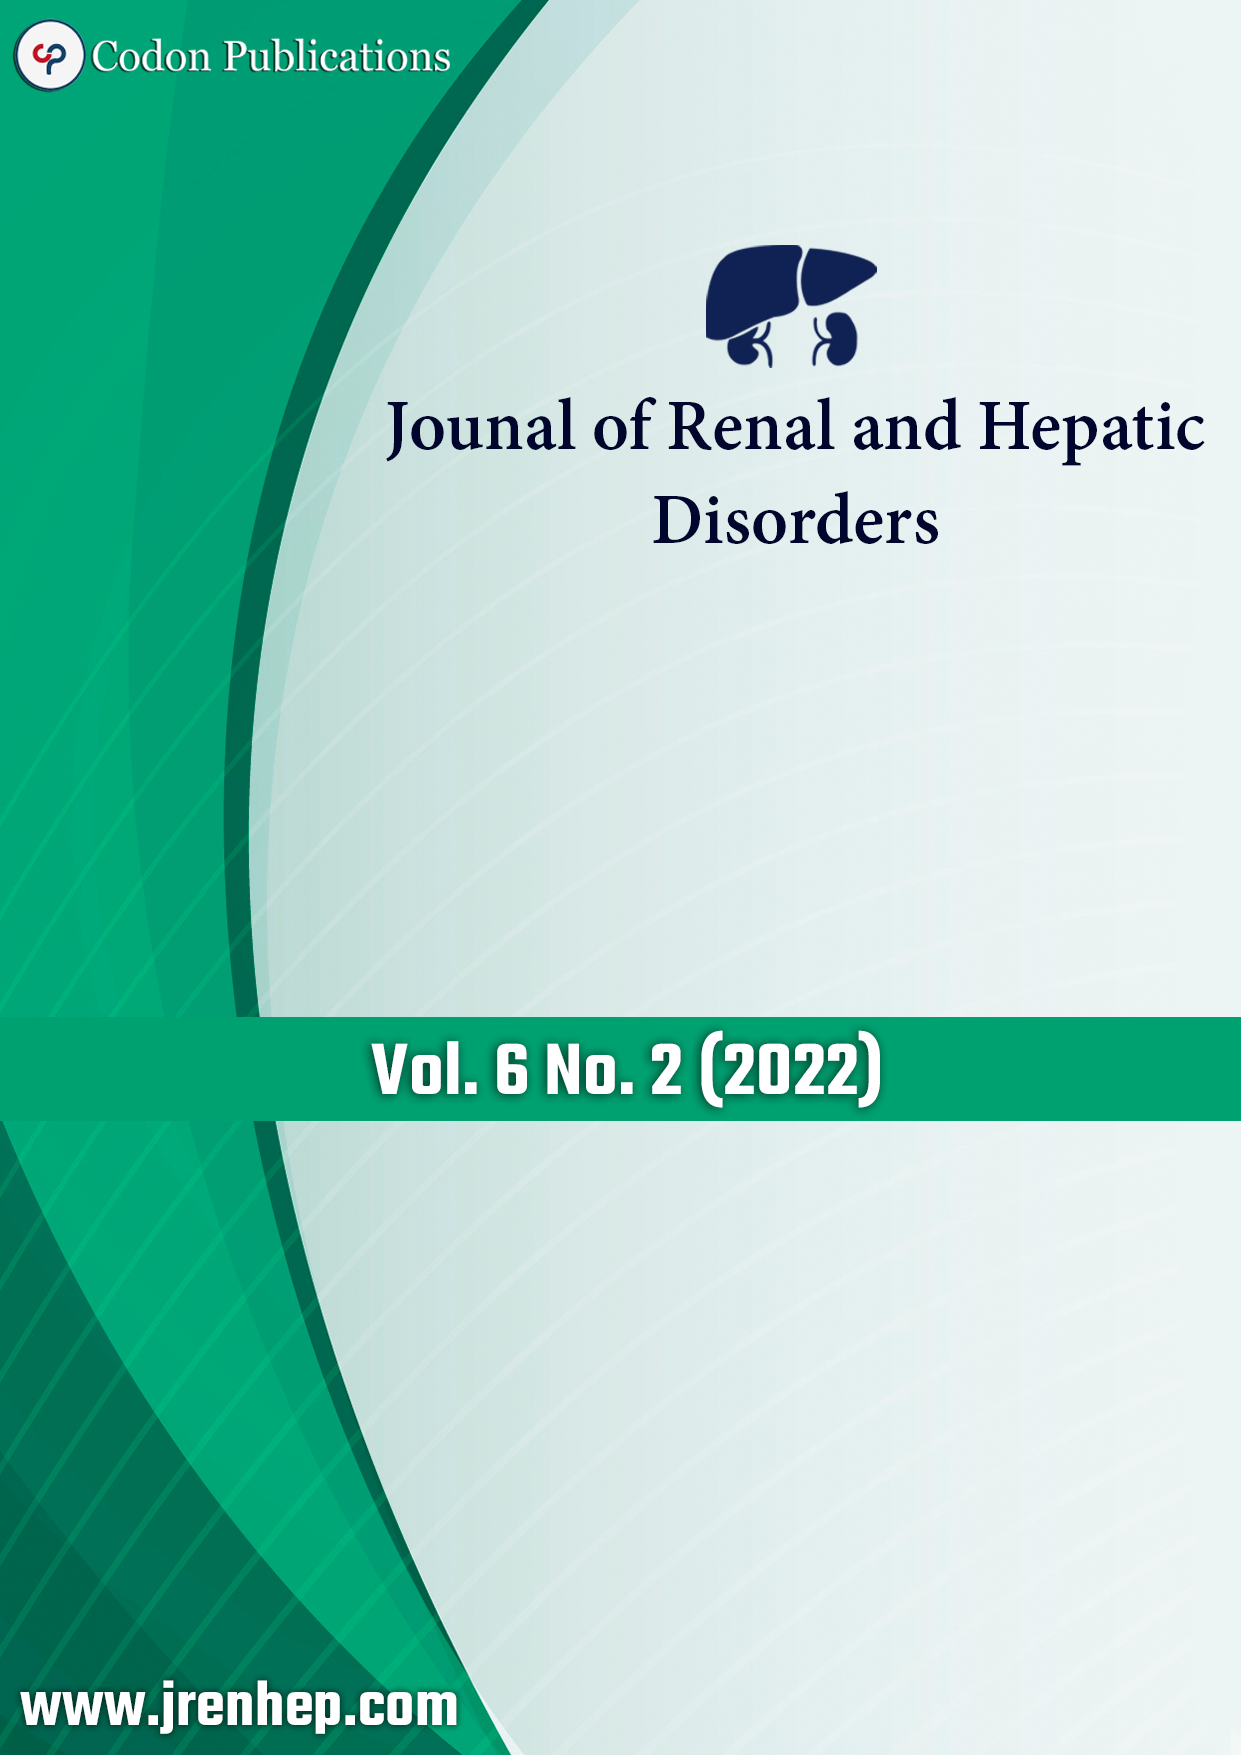 					View Vol. 6 No. 2 (2022): Journal of Renal and Hepatic Disorders
				